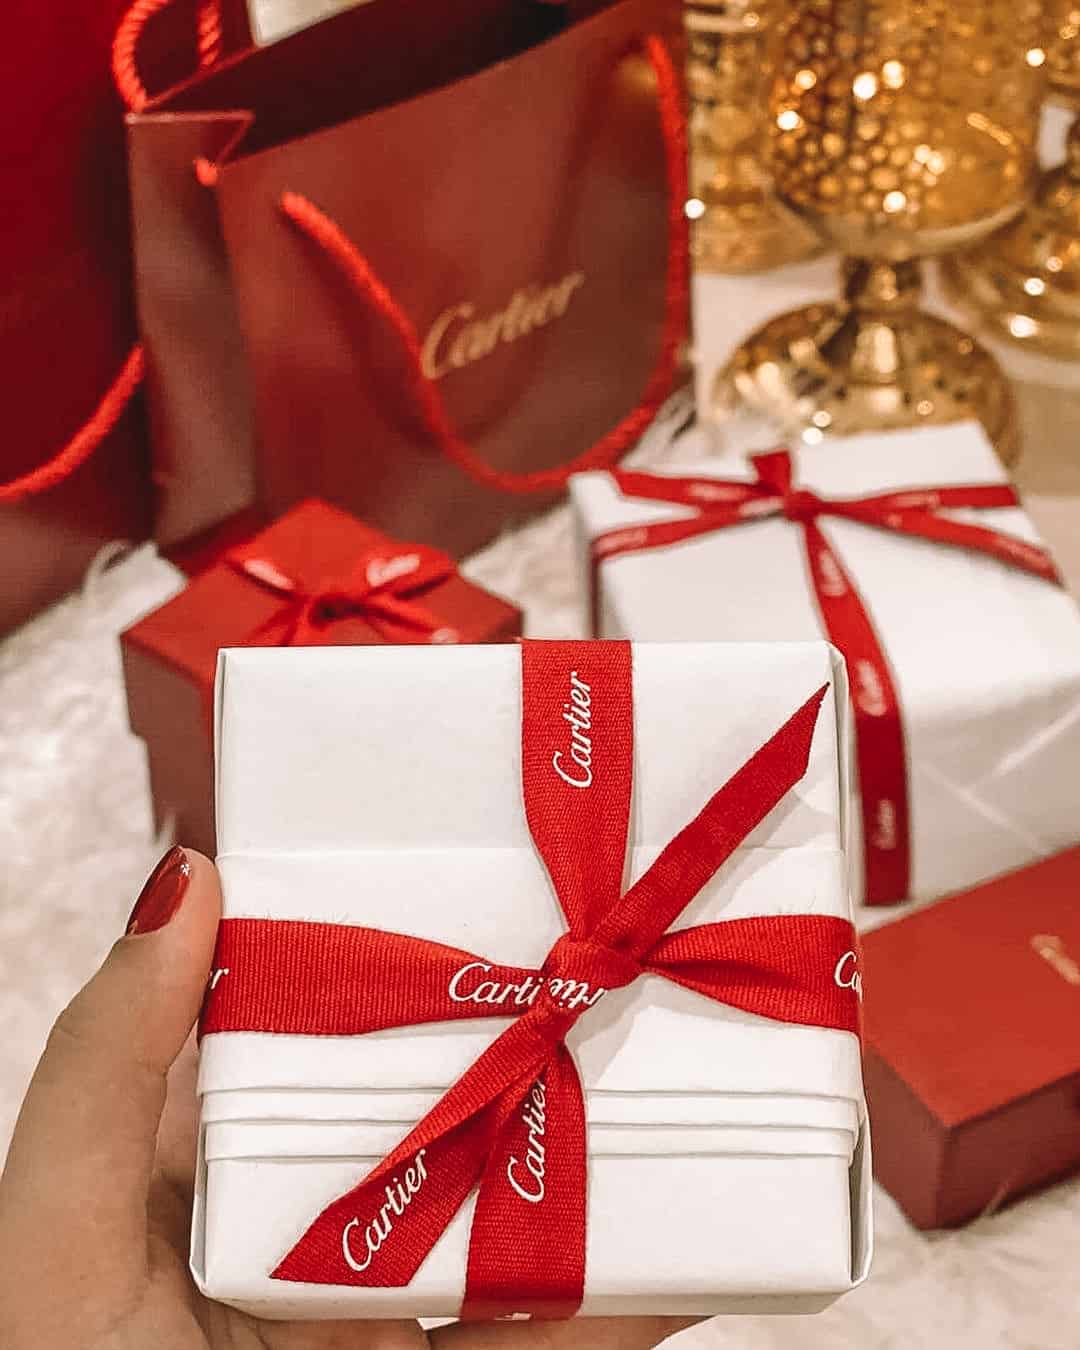 Cartier boxes and gifts